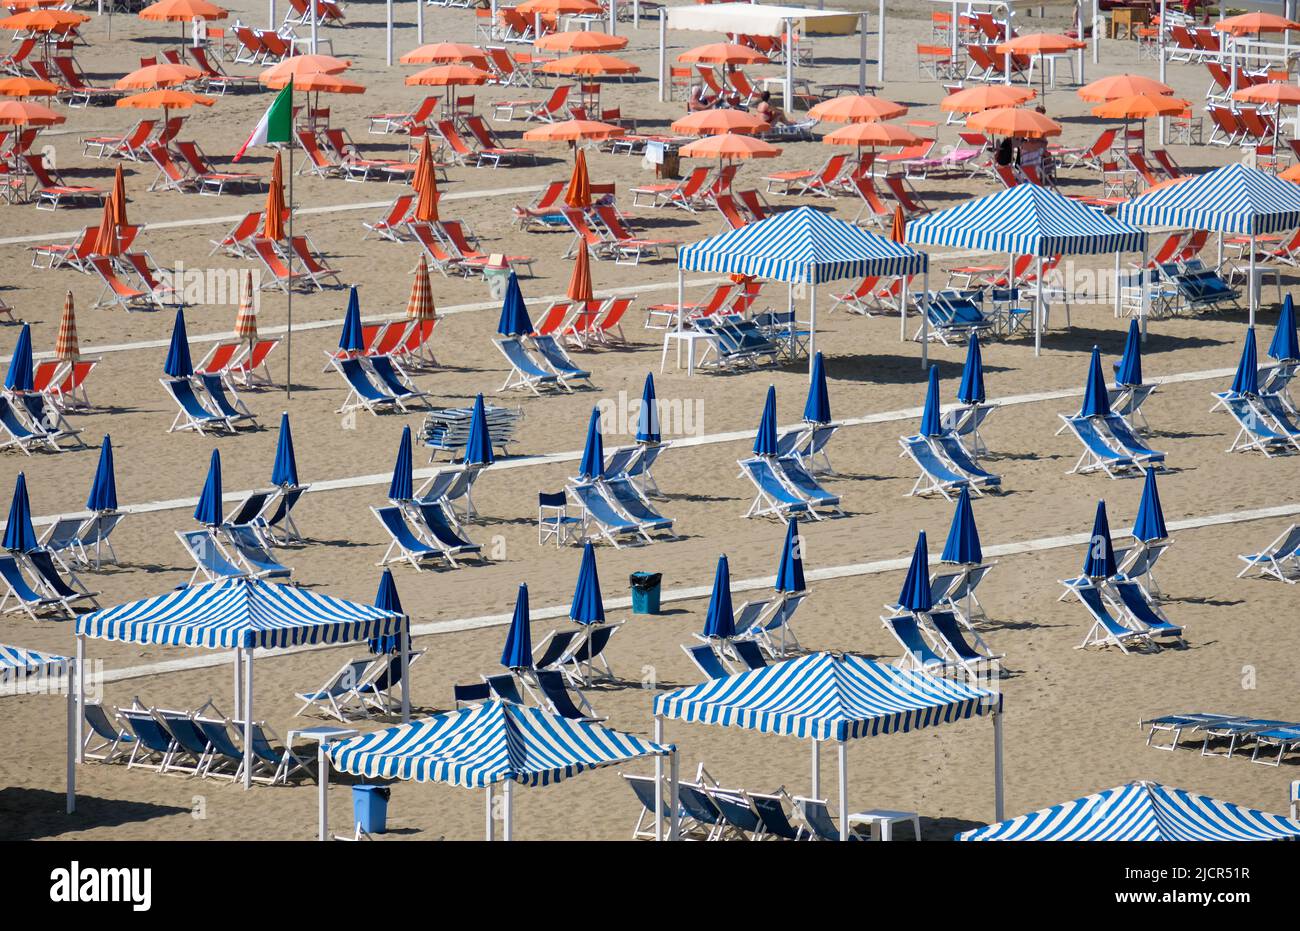 Blue and orange beach umbrellas  and chairs waiting for sunbathers. Stock Photo